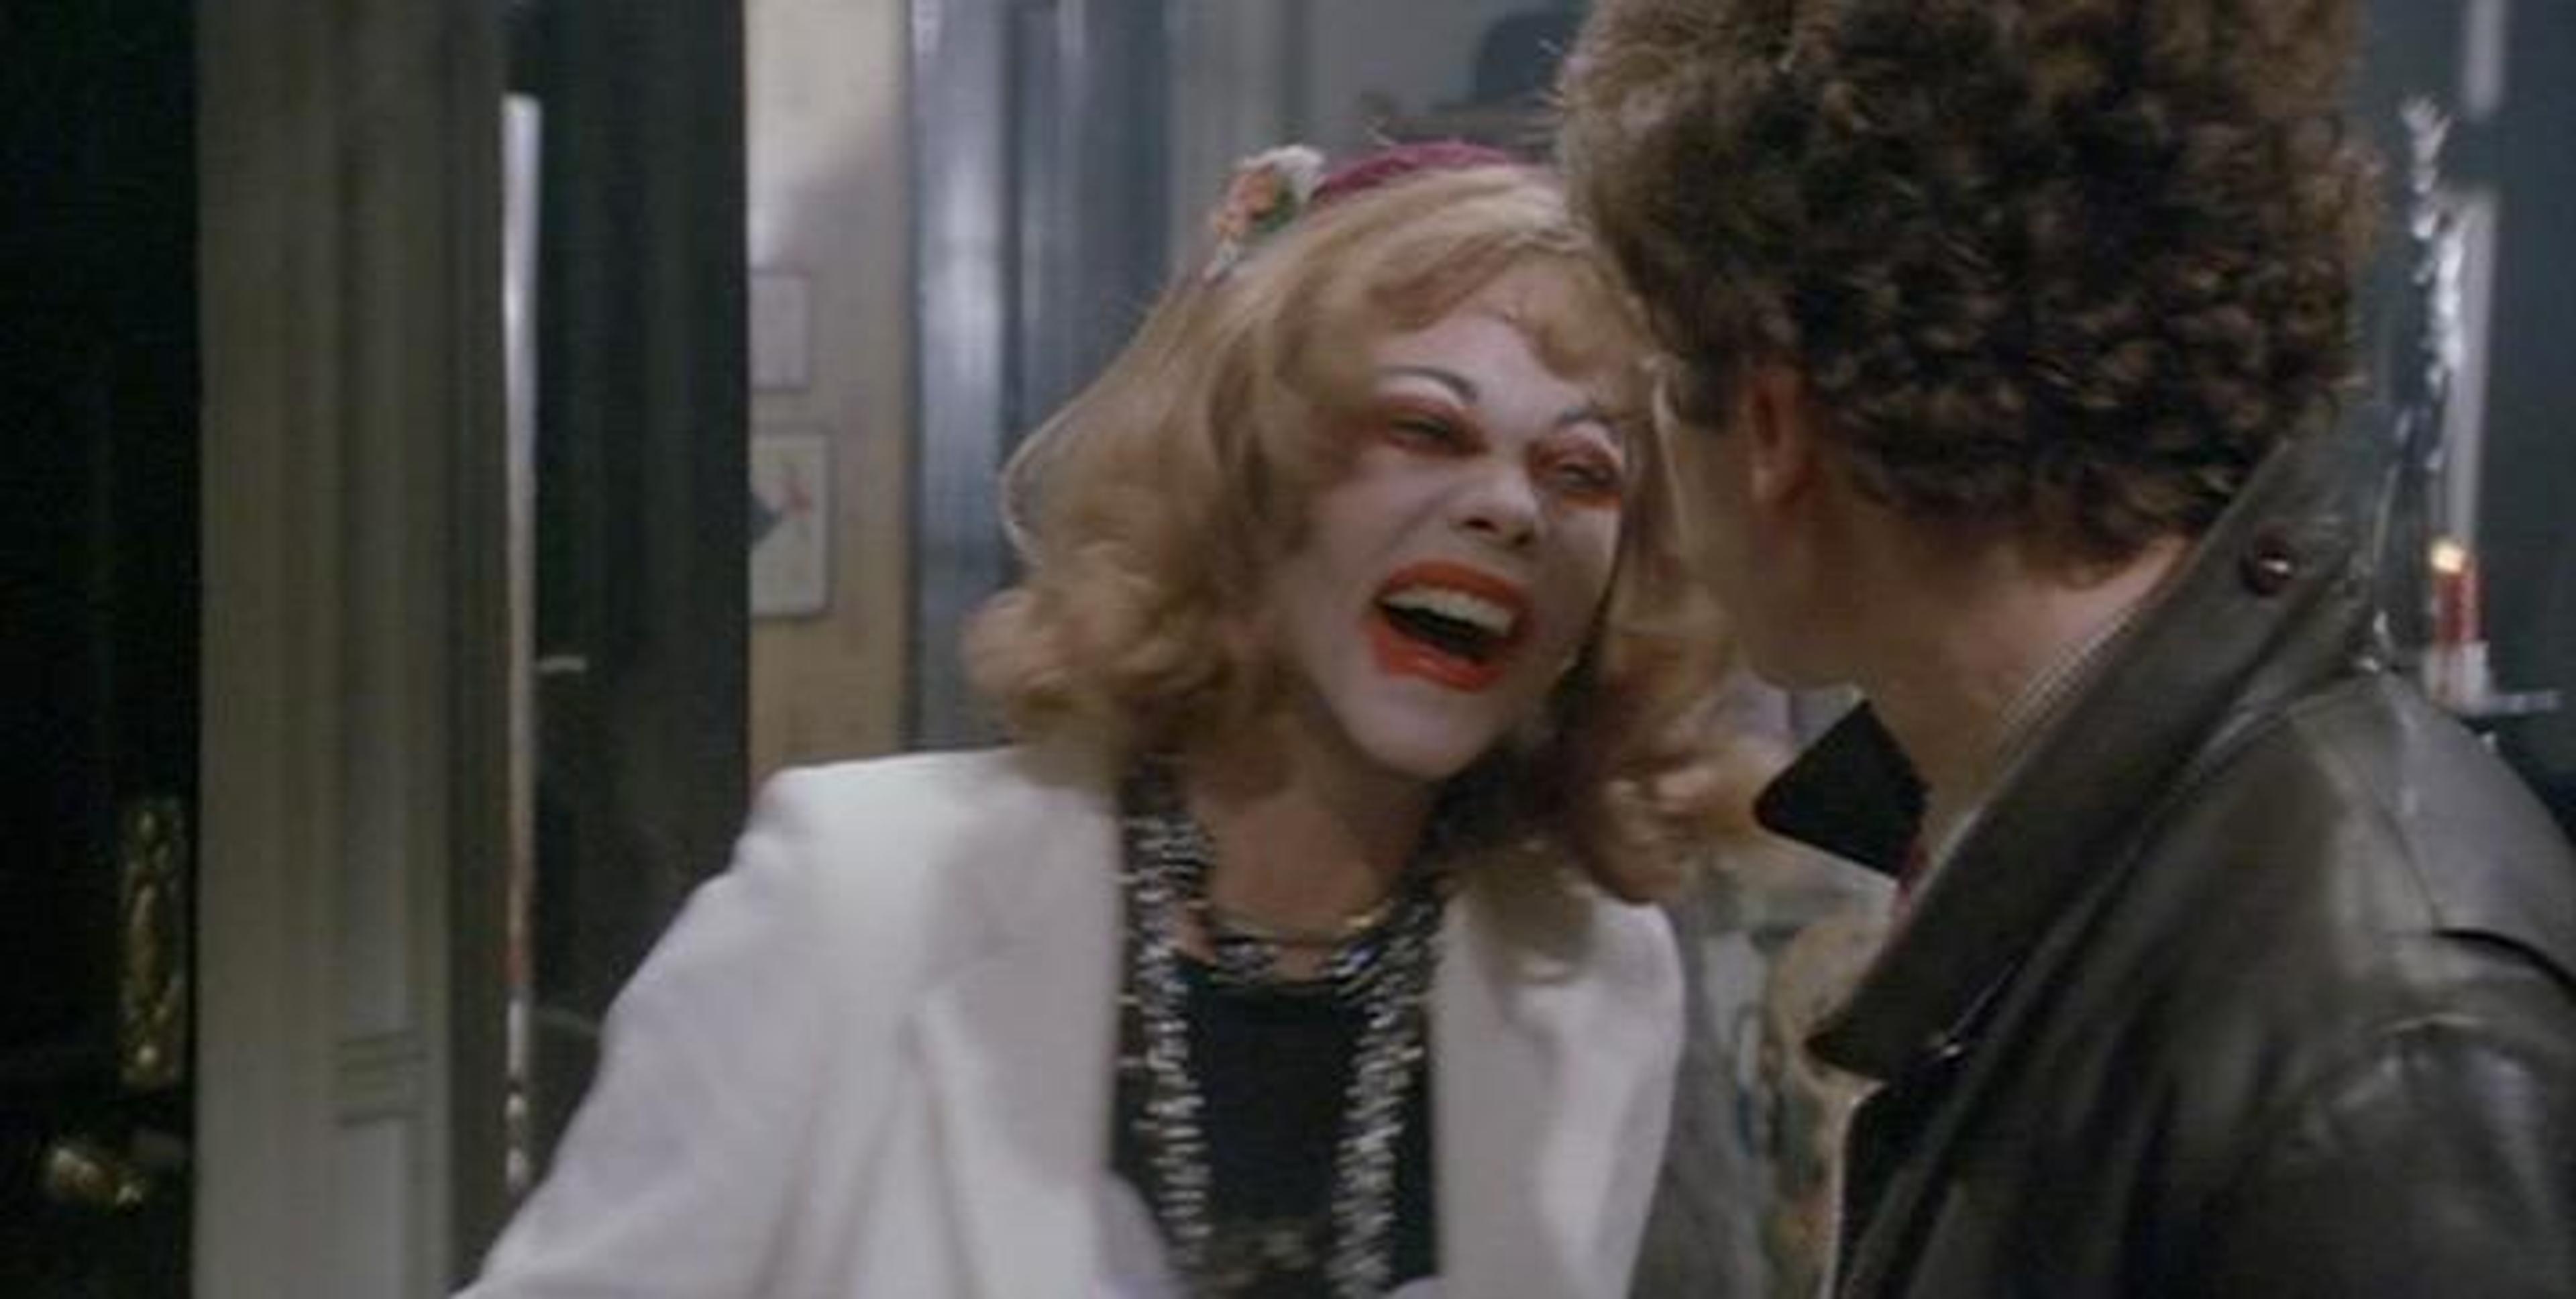 Bad Timing  (1980), directed by Nicolas Roeg